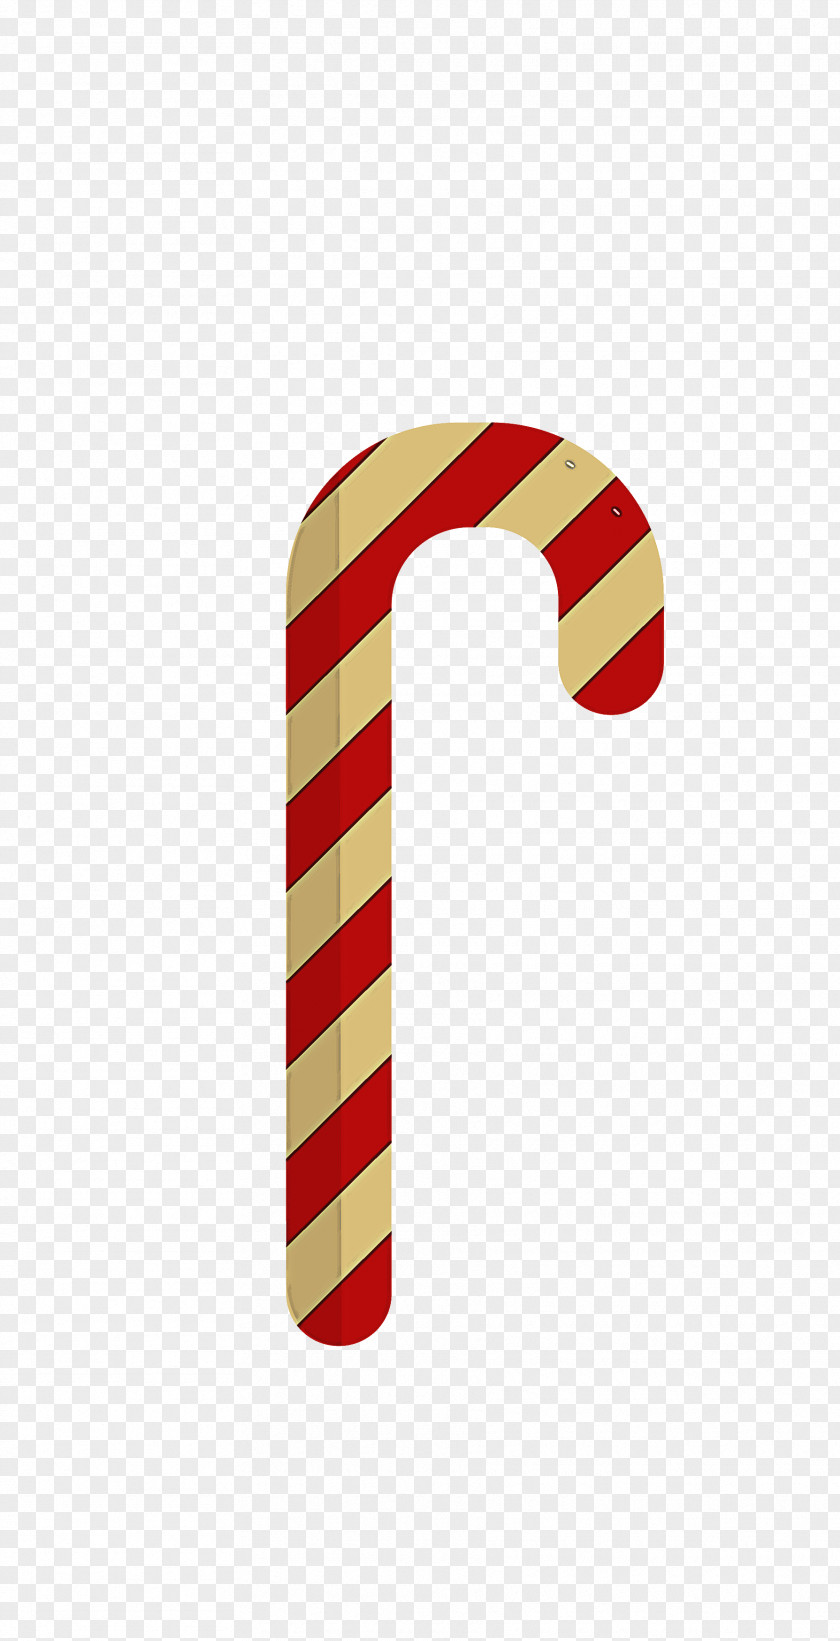 Candy Cane Christmas PNG